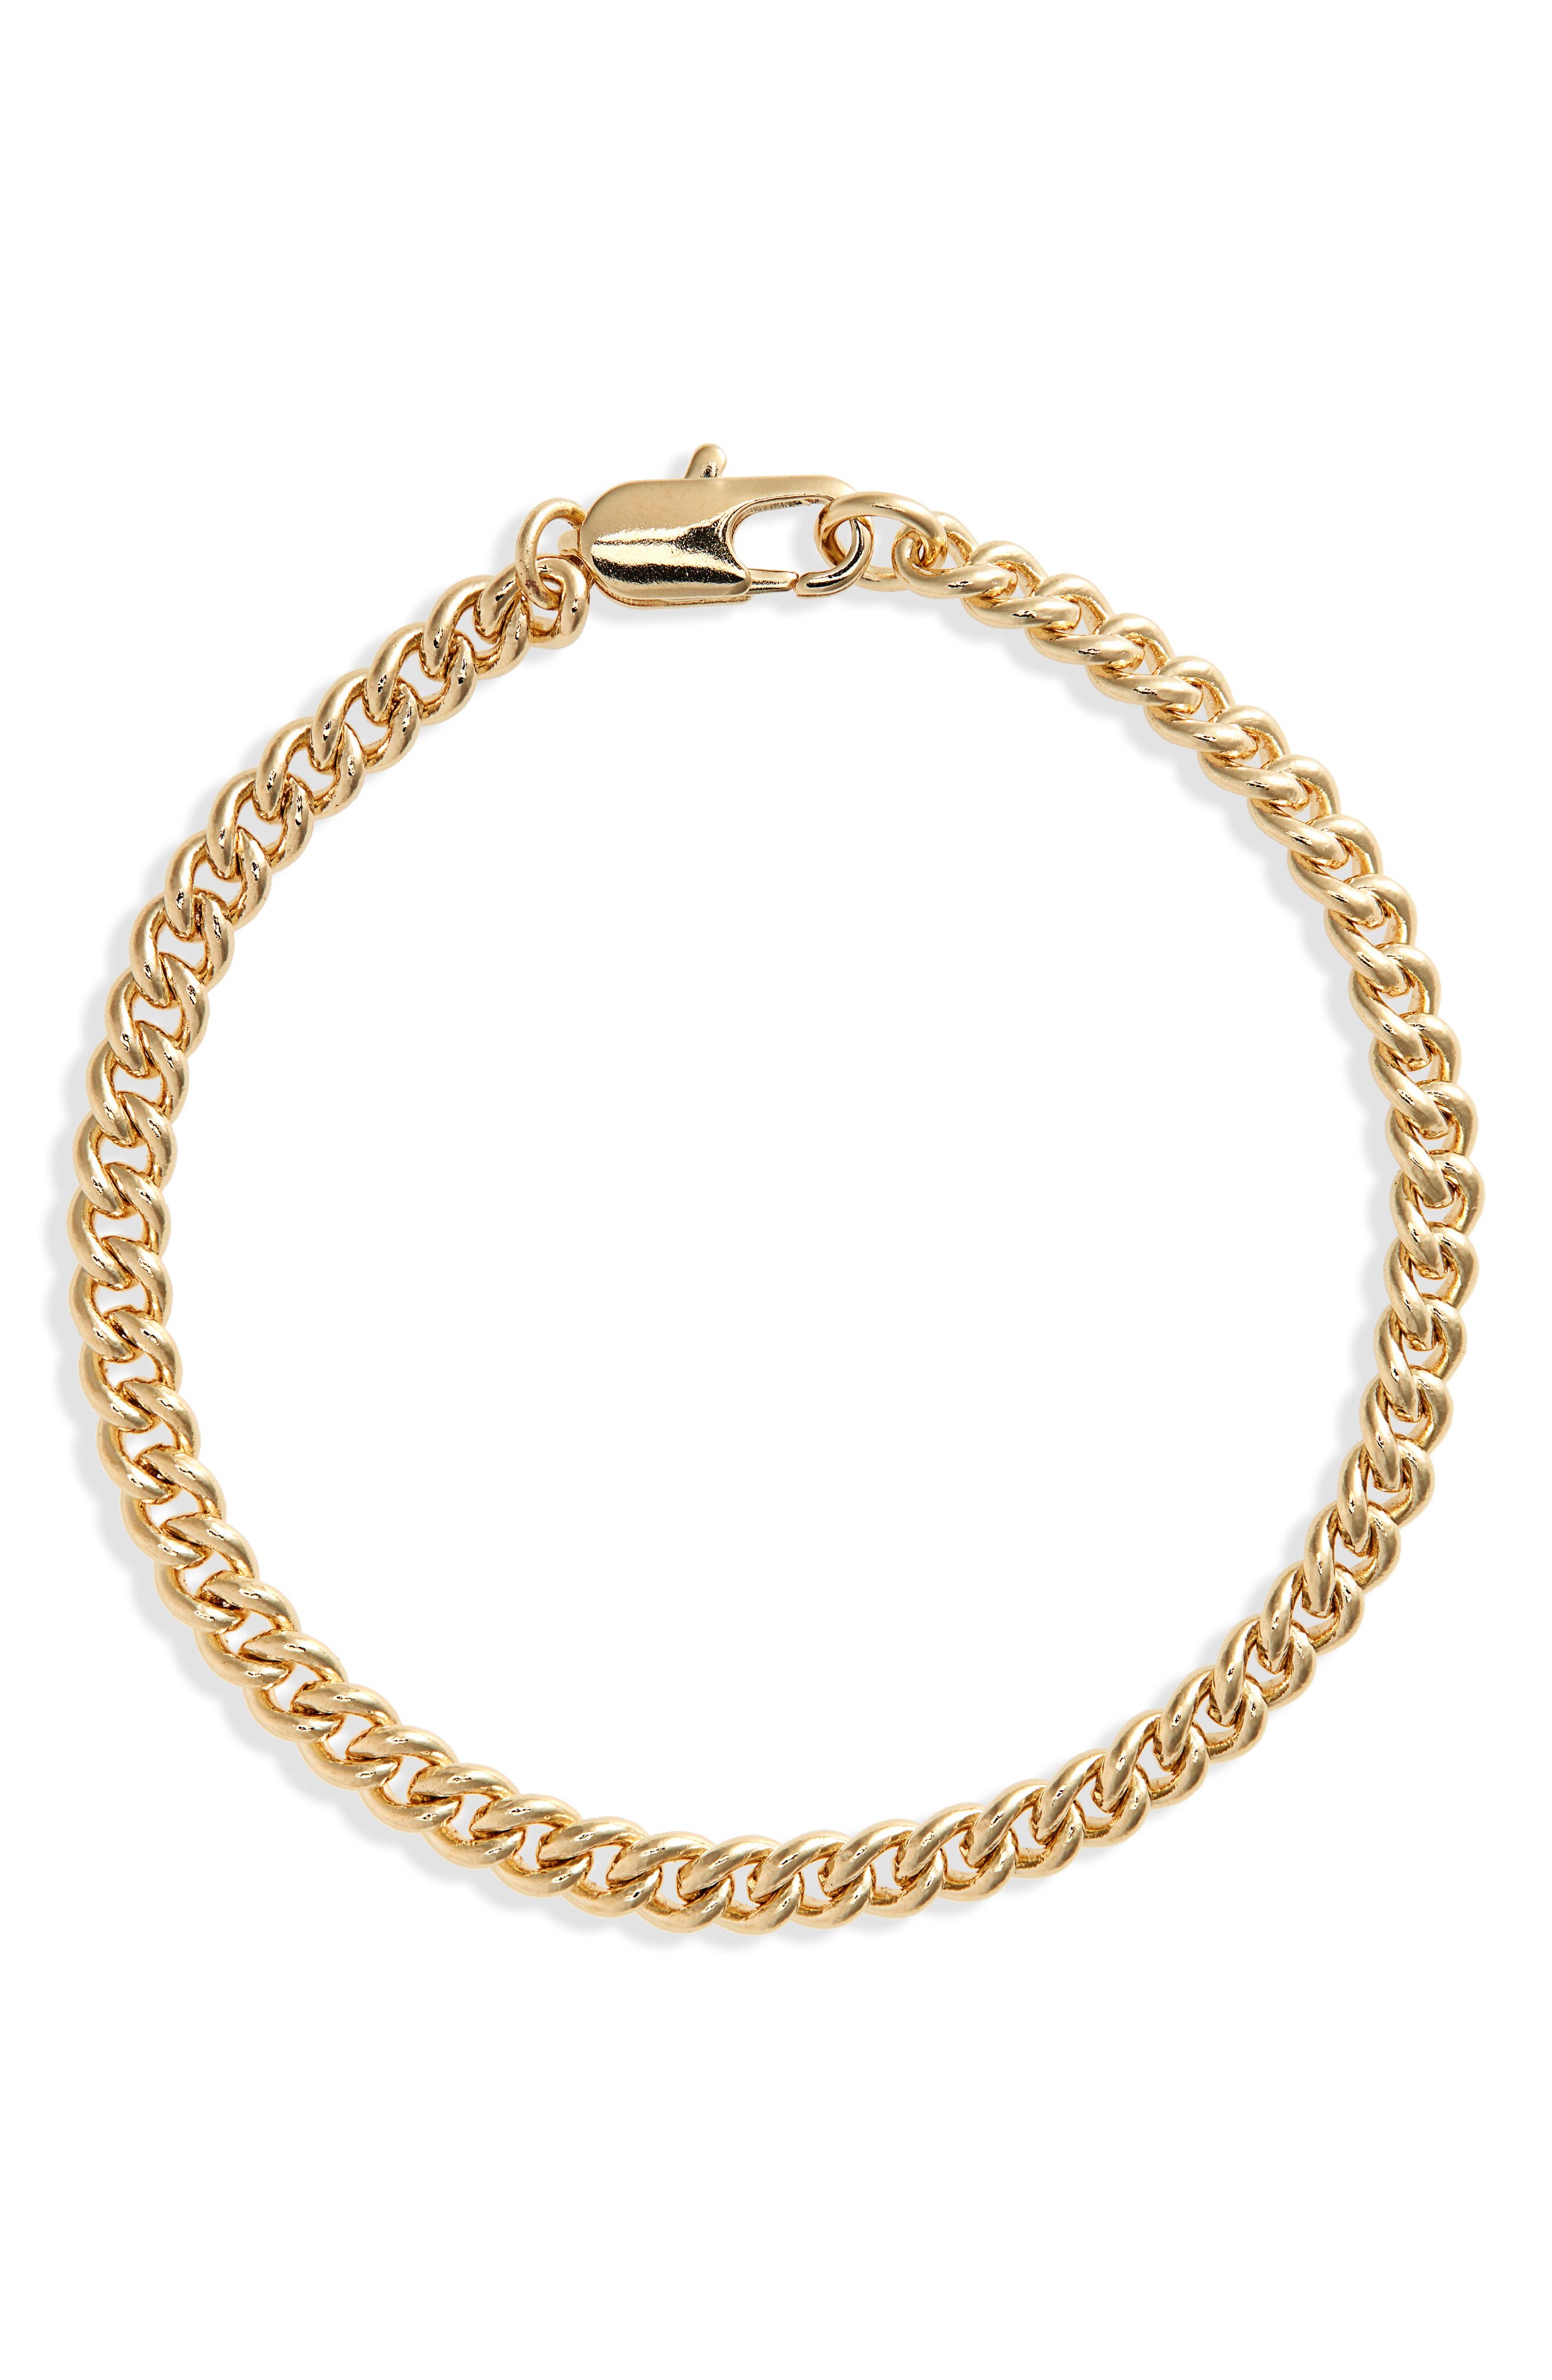 Laura Lombardi Curb Chain Bracelet in Brass at Nordstrom